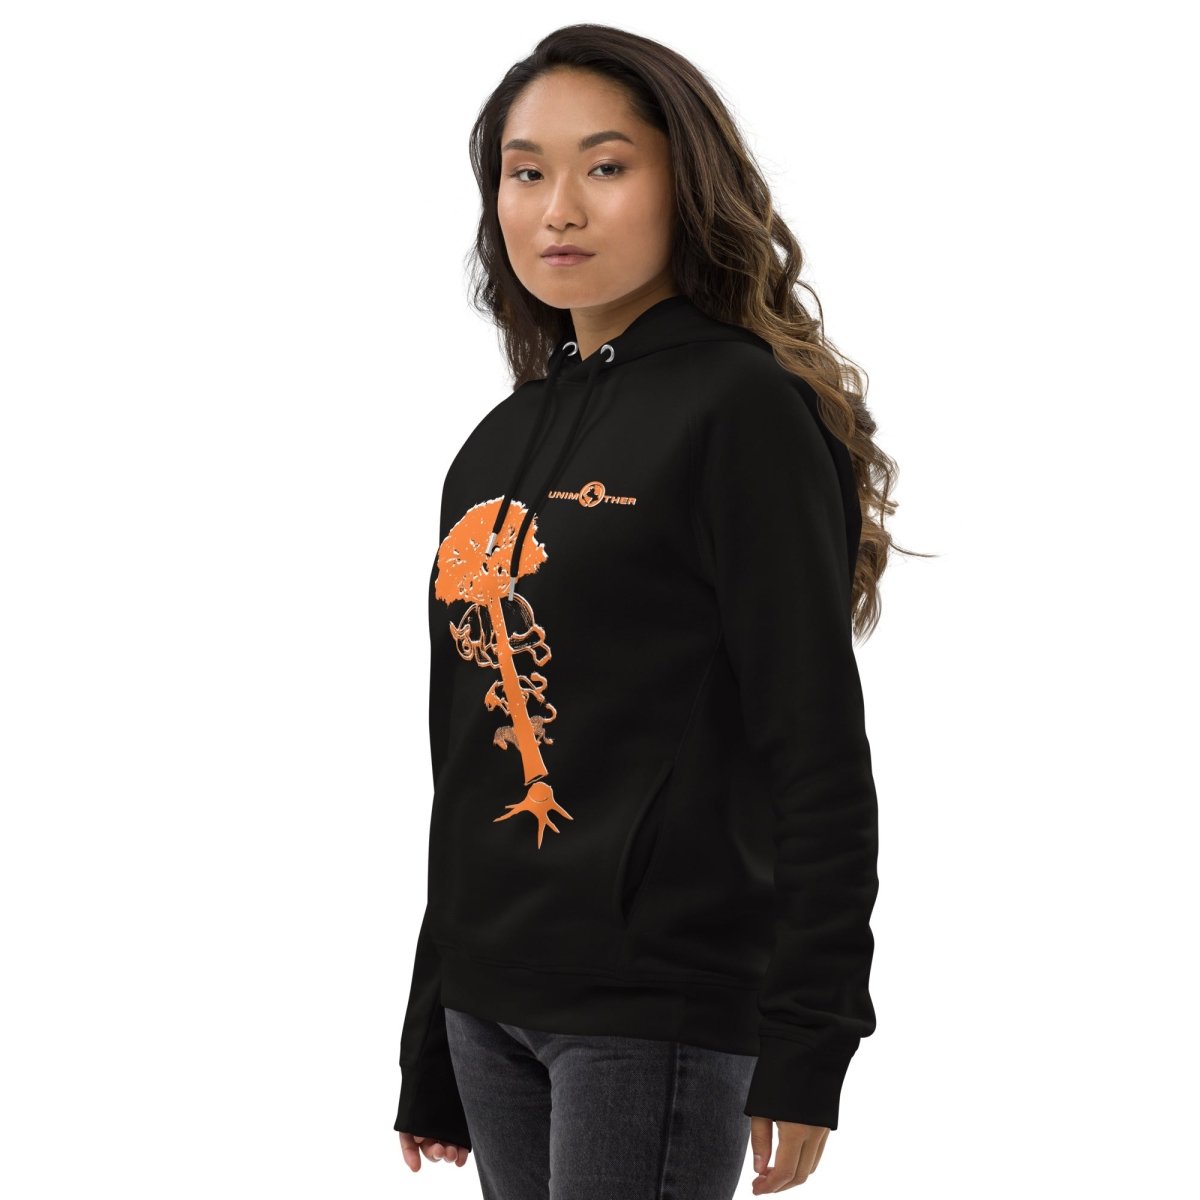 Deforestation 85% Organic Cotton 15% Recycled Polyester Unisex Pullover Hoodie - Unimother